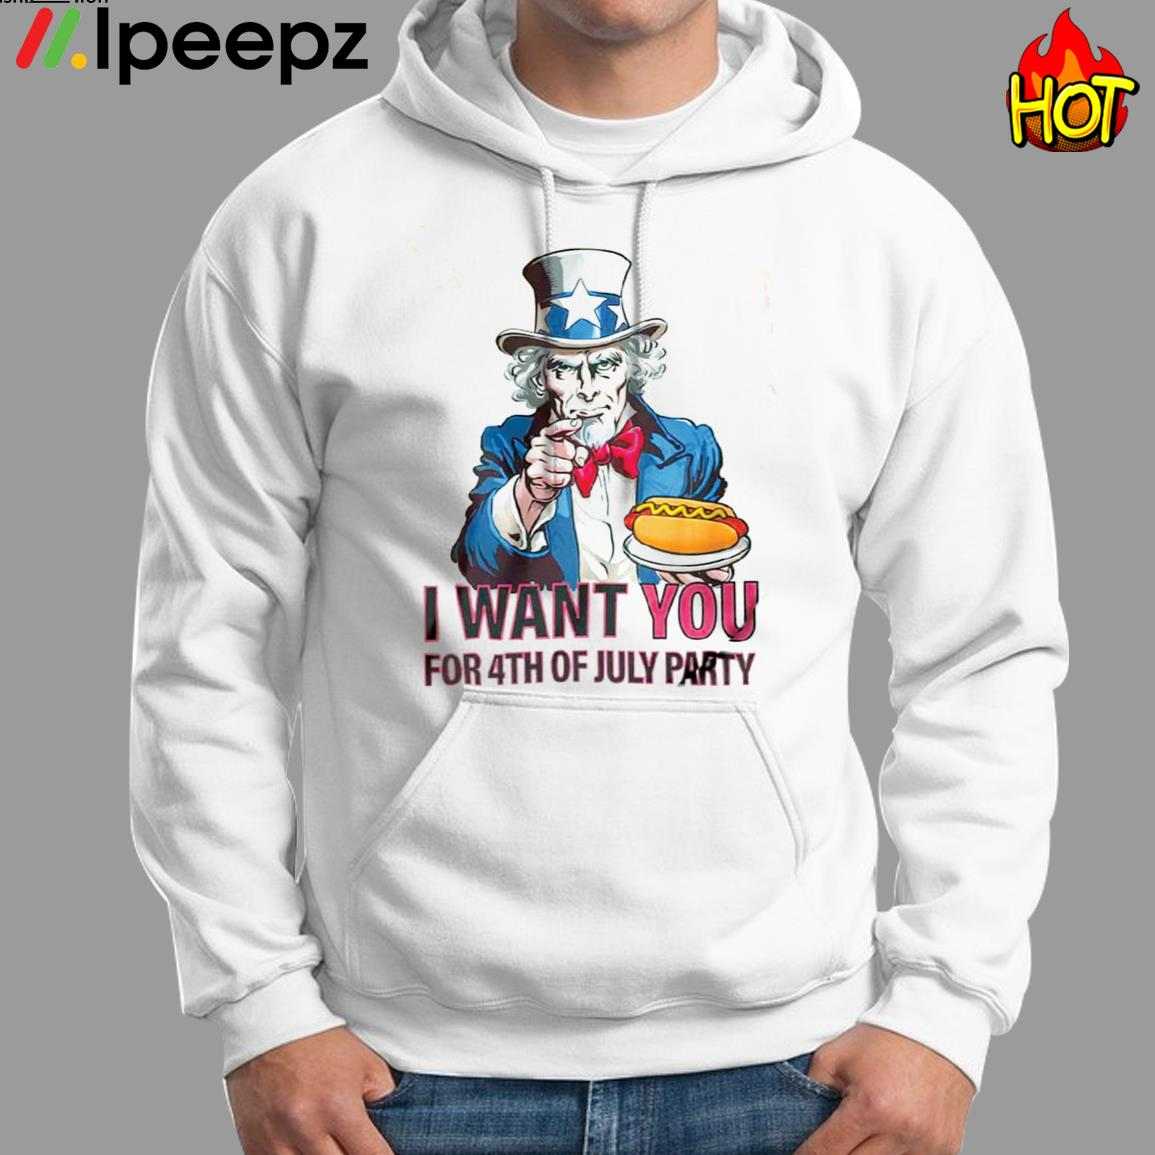 Uncle Sam Hold Hot I Want You 4th Of July Shirt 1